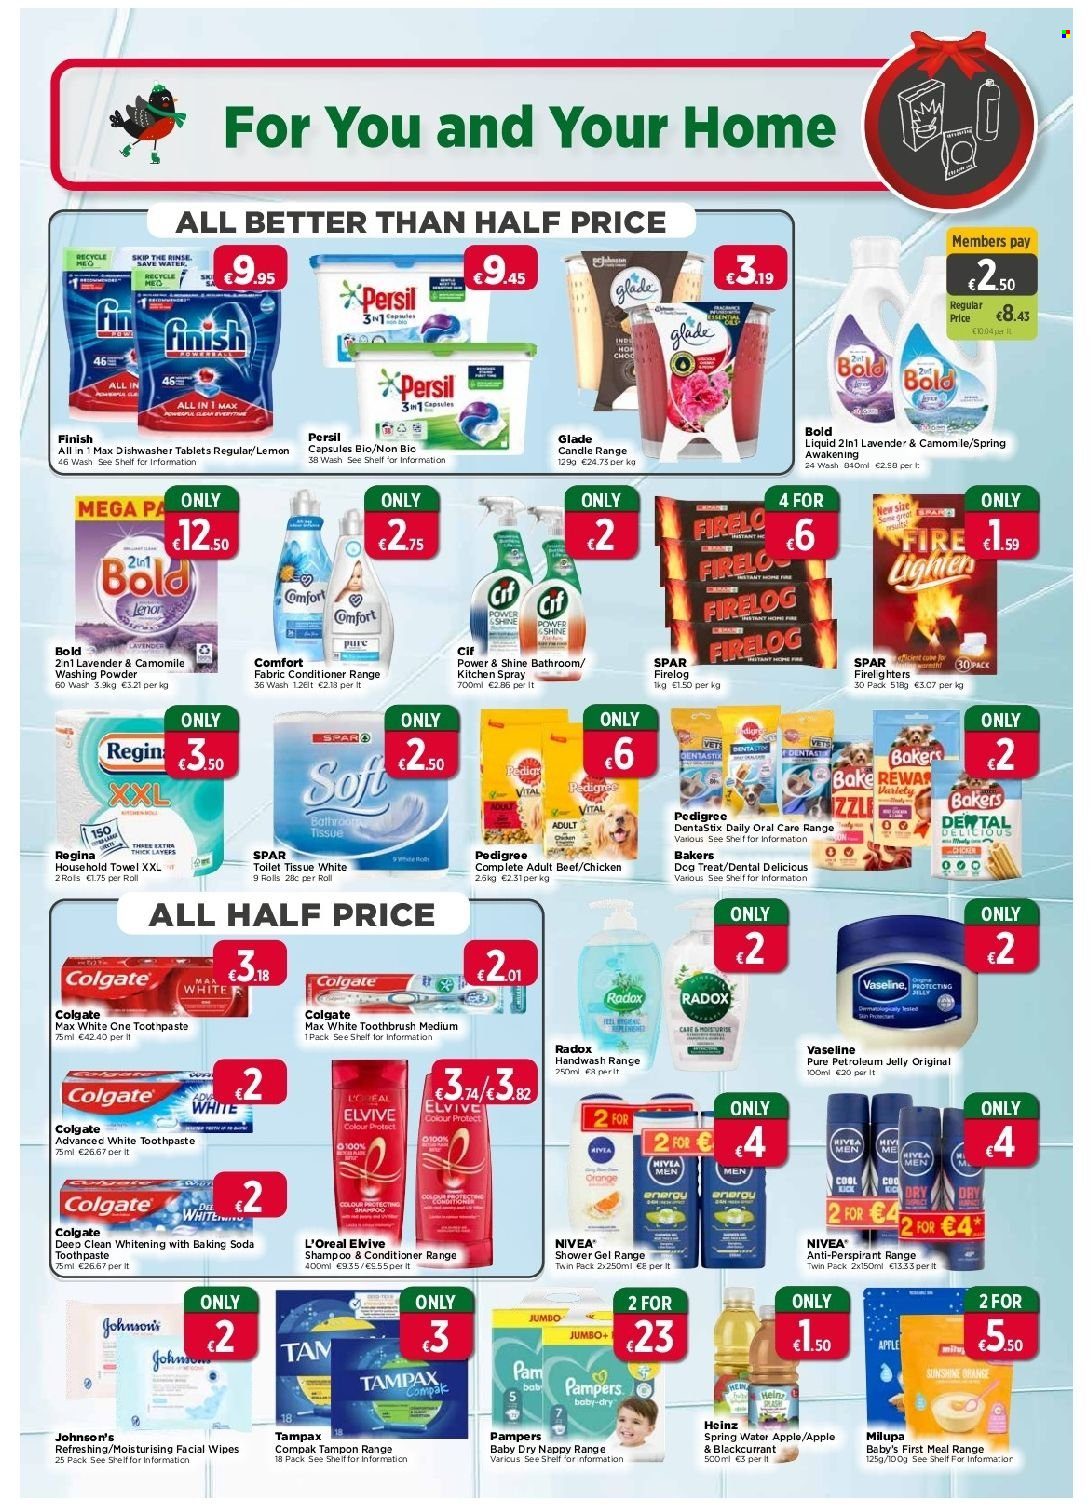 EUROSPAR offer  - 2.12.2021 - 29.12.2021 - Sales products - Sunshine, bicarbonate of soda, Heinz, spring water, wipes, Pampers, nappies, Johnson's, Nivea, petroleum jelly, toilet paper, Cif, Persil, fabric conditioner, laundry powder, Lenor, Comfort softener, dishwasher cleaner, dishwasher tablets, shampoo, shower gel, hand wash, Radox, Vaseline, Colgate, toothbrush, toothpaste, Tampax, tampons, L’Oréal, anti-perspirant, BIC, candle, Glade, towel, Dentastix, Pedigree, Bakers. Page 7.